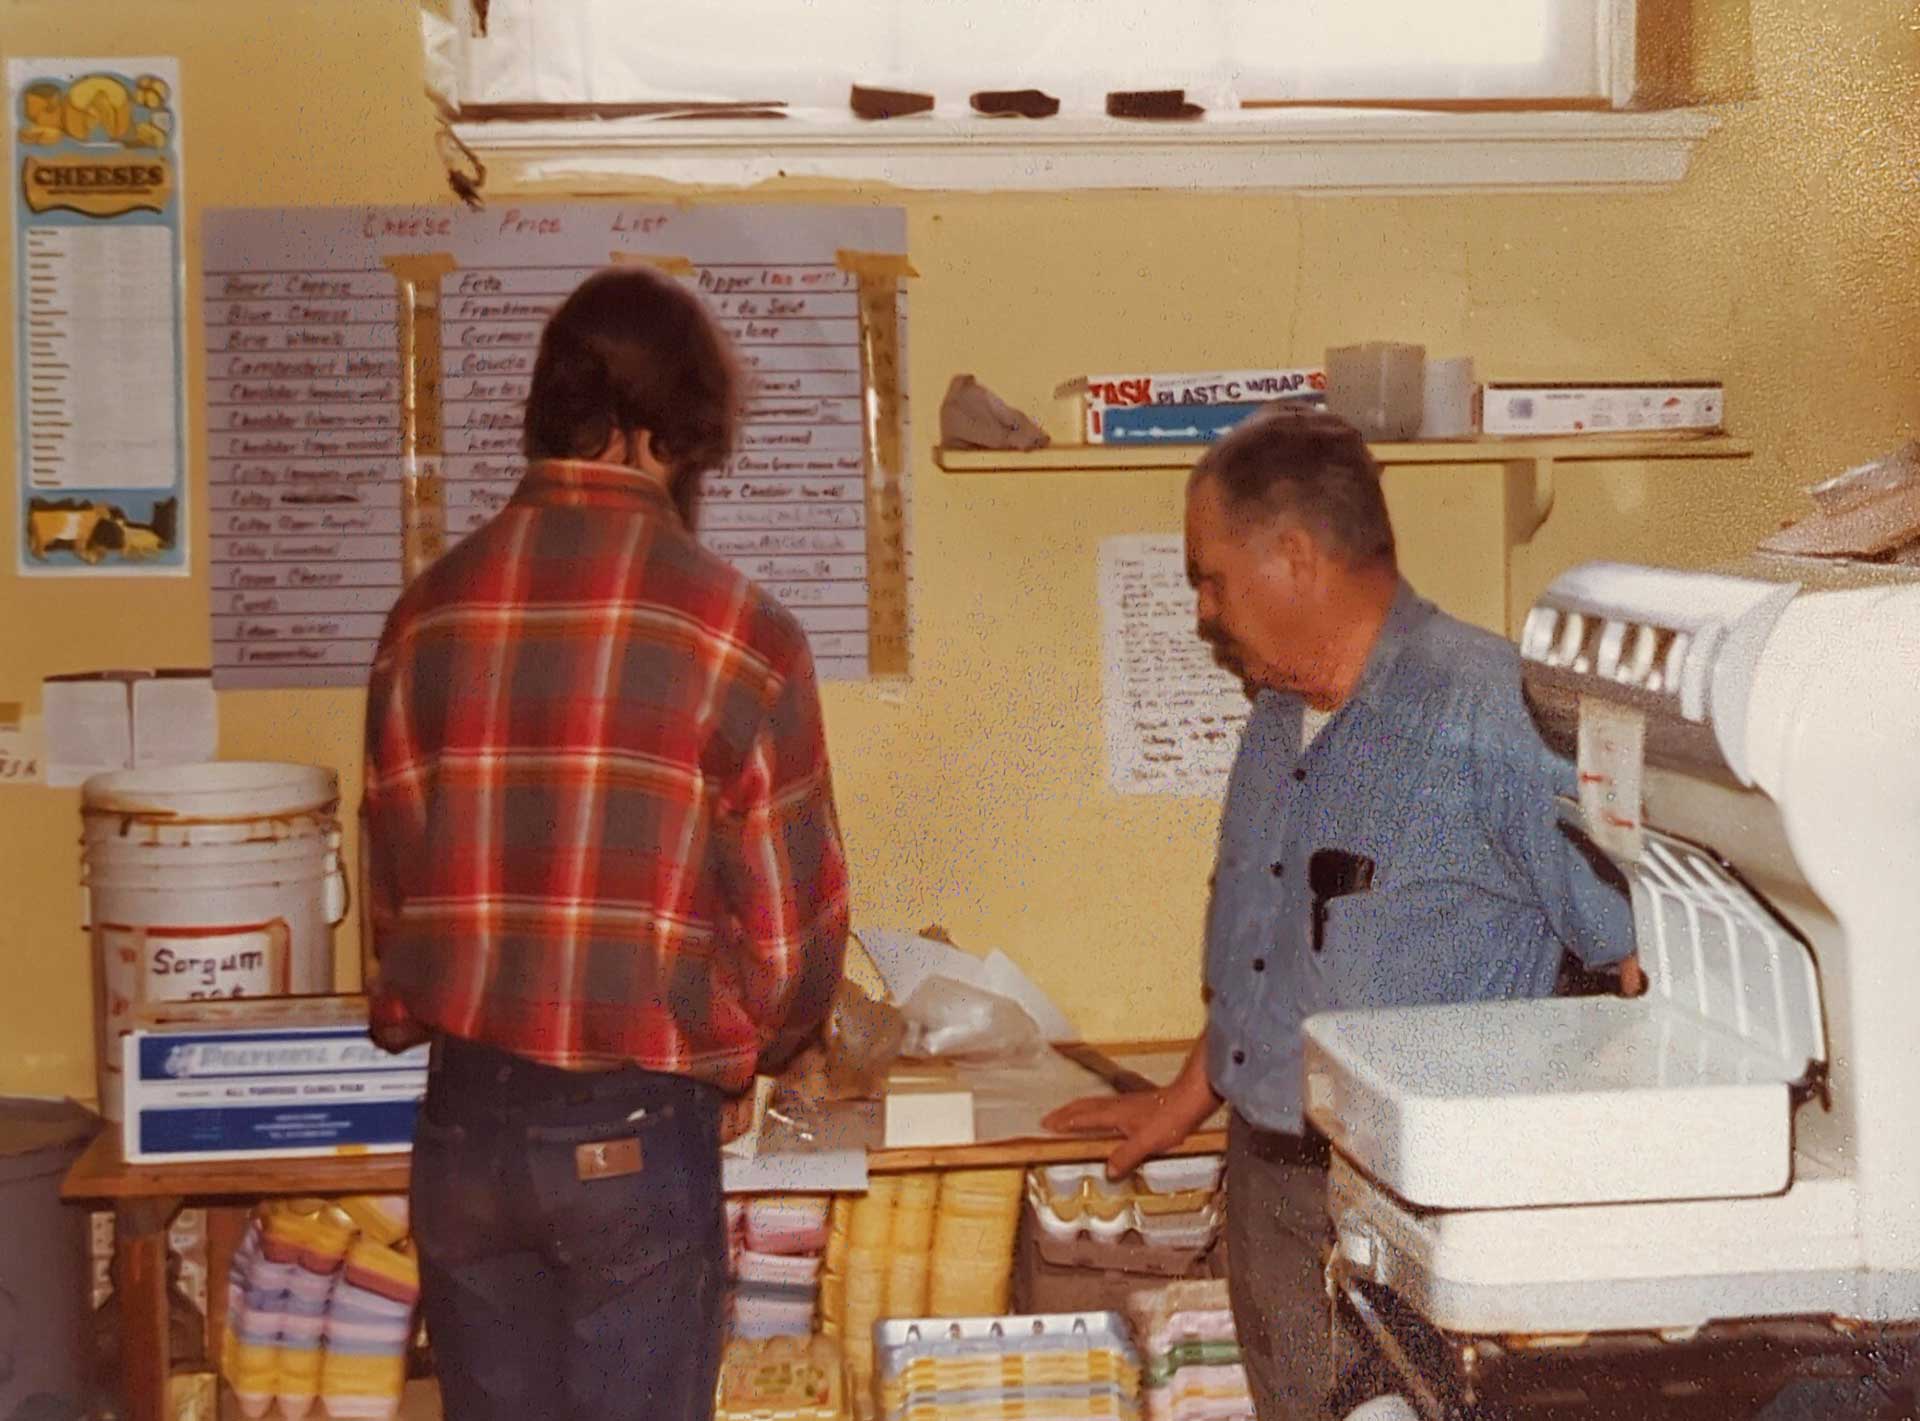 Two men stand in a small shop. One man in a red plaid shirt faces away, examining items on a counter. The other man in a blue shirt faces left, looking at the counter. Shelves display various products, reminiscent of those found at Whole Foods Coop Duluth MN, and a menu hangs on the wall above them.